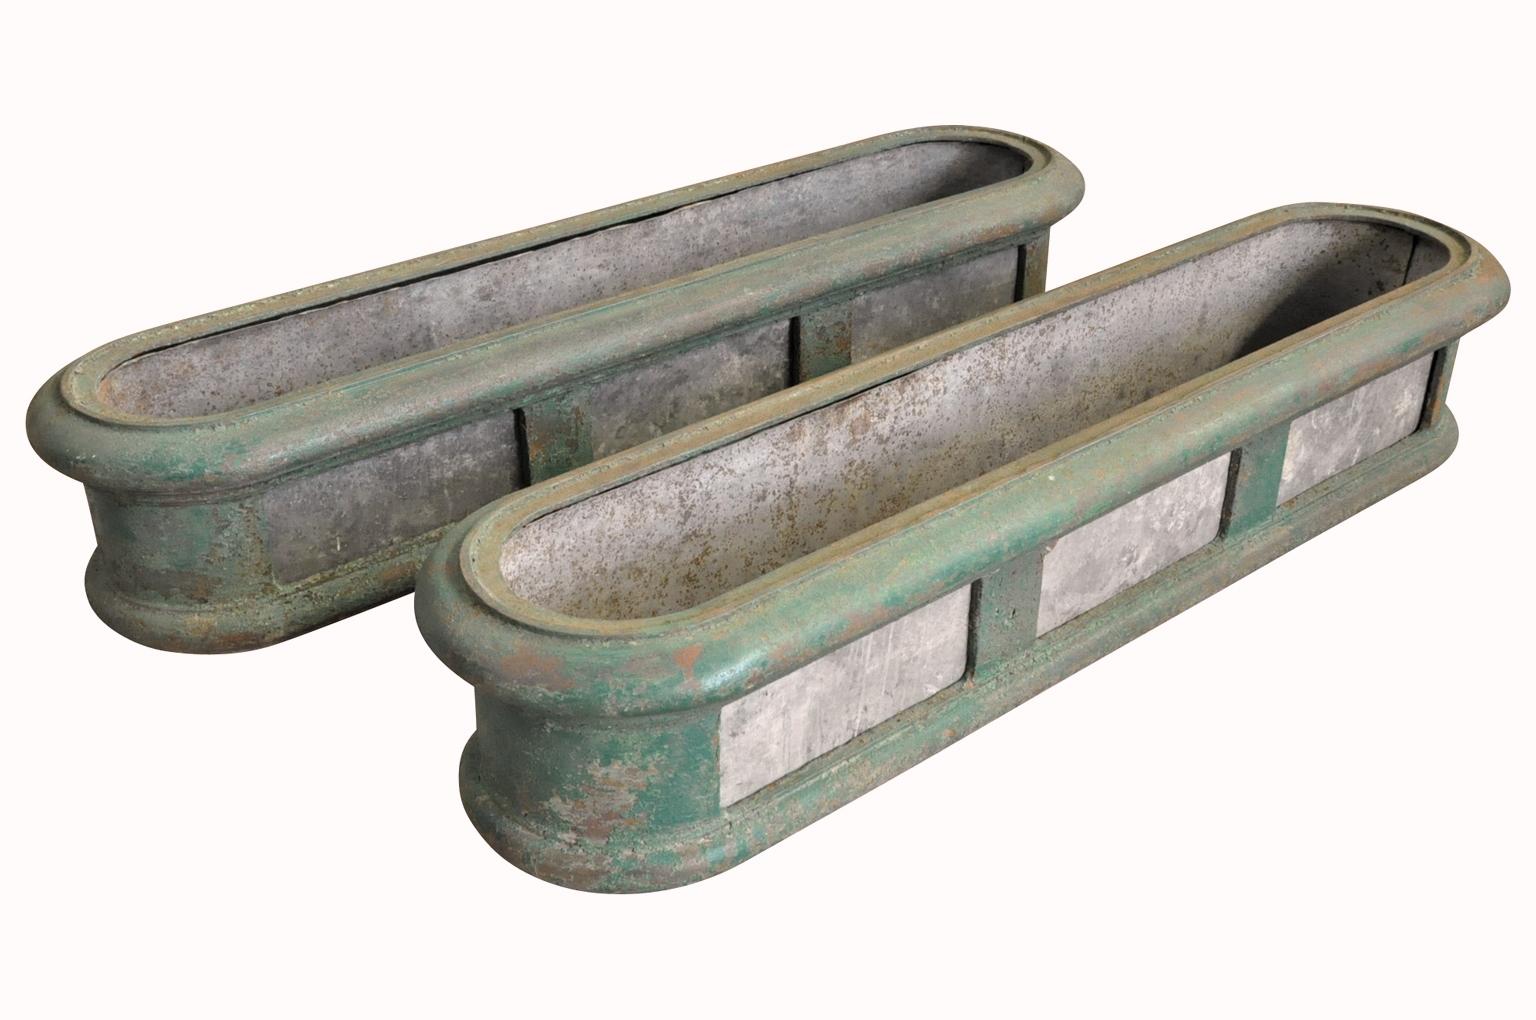 A wonderful pair of 19th century oblong shape jardinières - planters soundly constructed from painted cast iron and zinc. Terrific shape and terrific patina. Wonderful for any interior or garden.